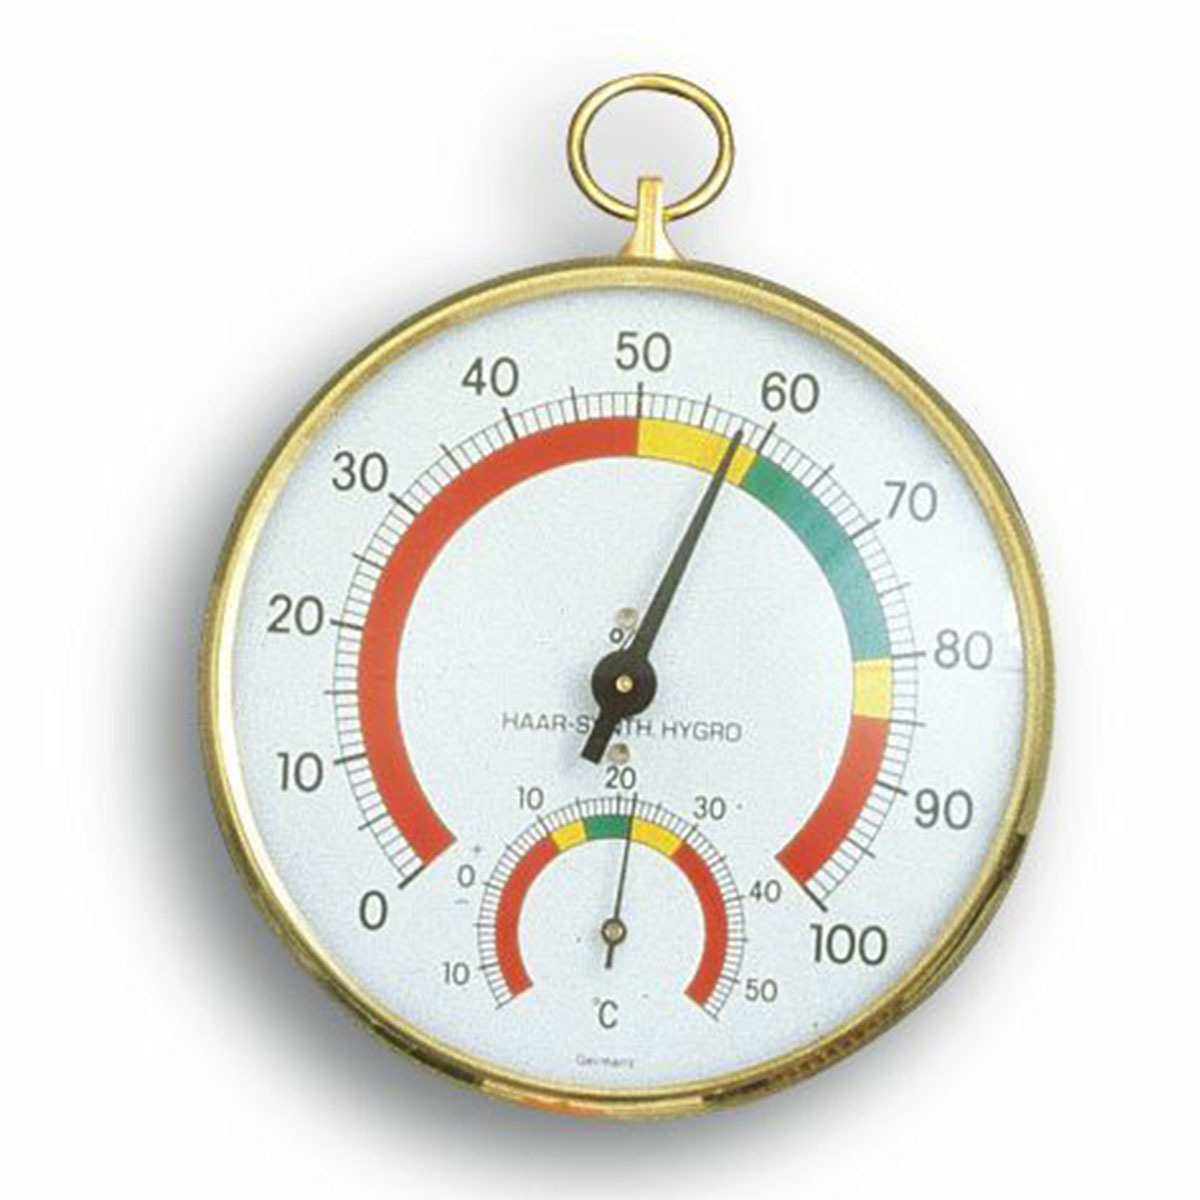 45-2000-analoges-thermo-hygrometer-mit-messingring-1200x1200px.jpg